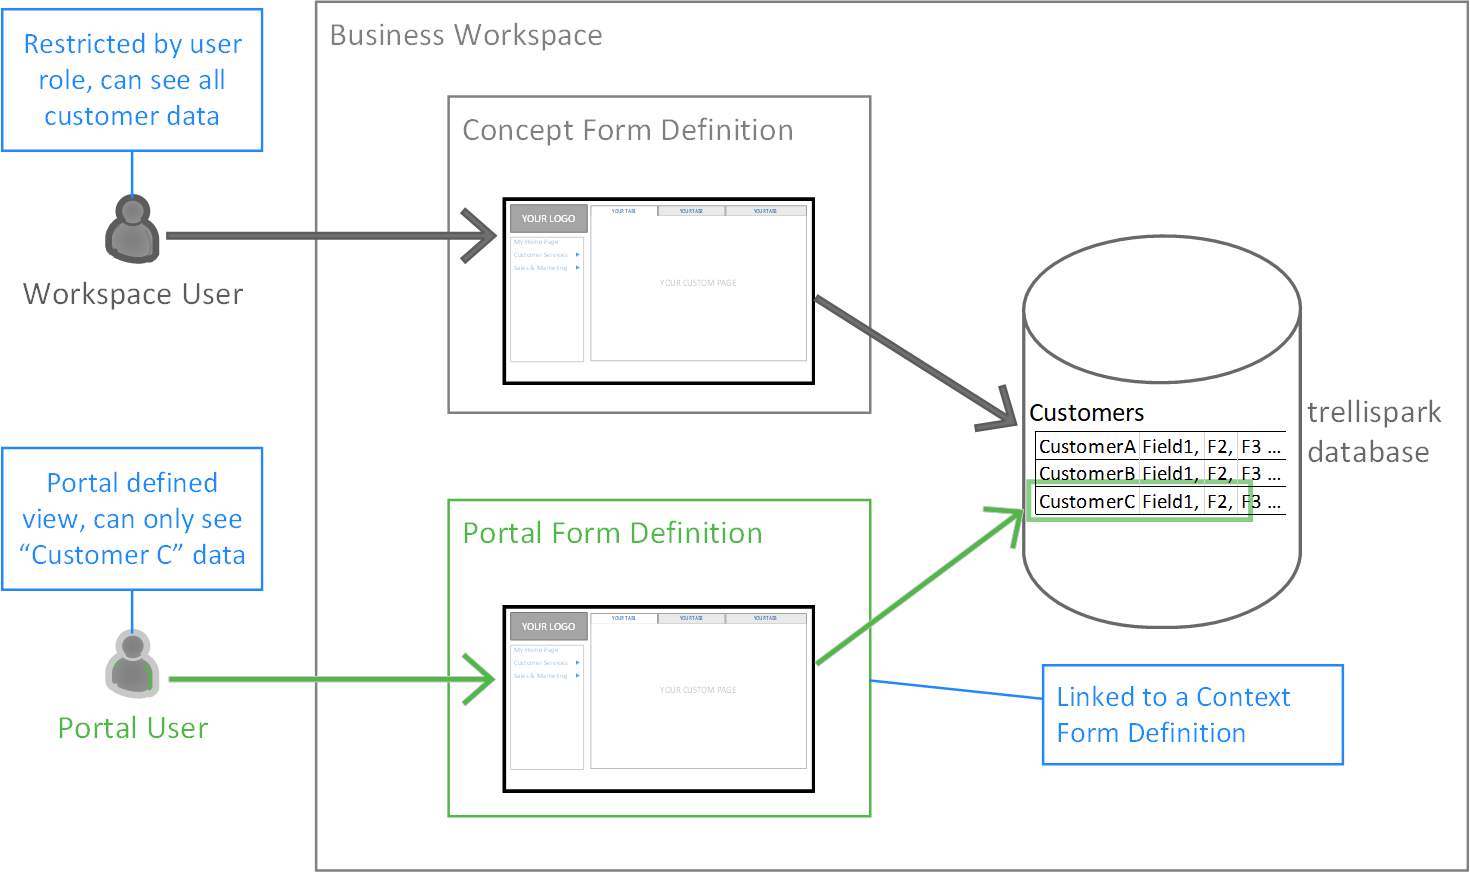 Diagram showing how workspace users can see information about all customers, restricted by their user role, whereas portal users can only see information about their specific customer record